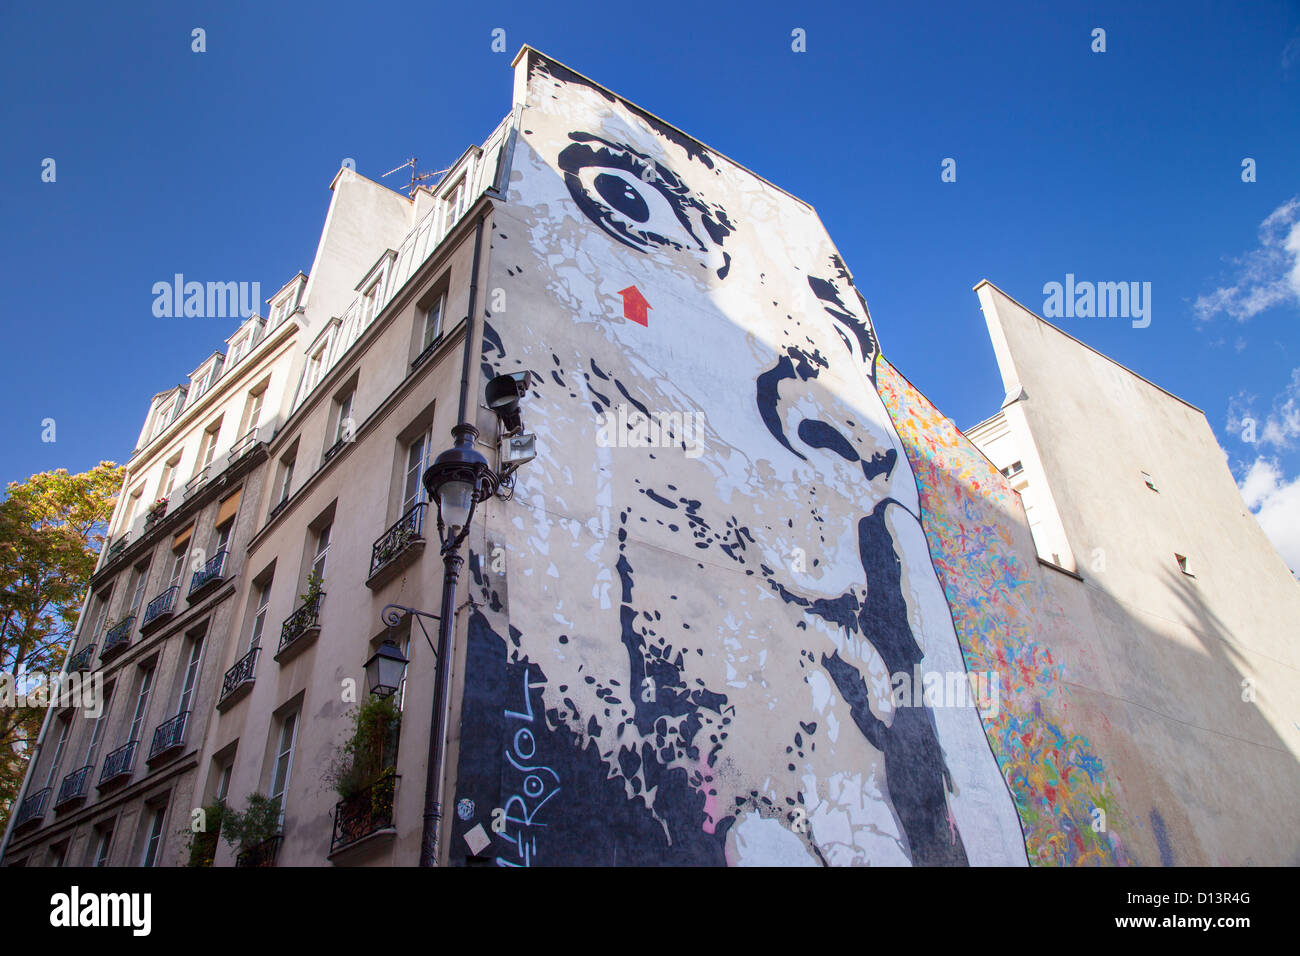 Jeff Aerosol's commissioned work of graffiti art on the side of a building adjacent to the Pompidou Centre, Paris, France Stock Photo